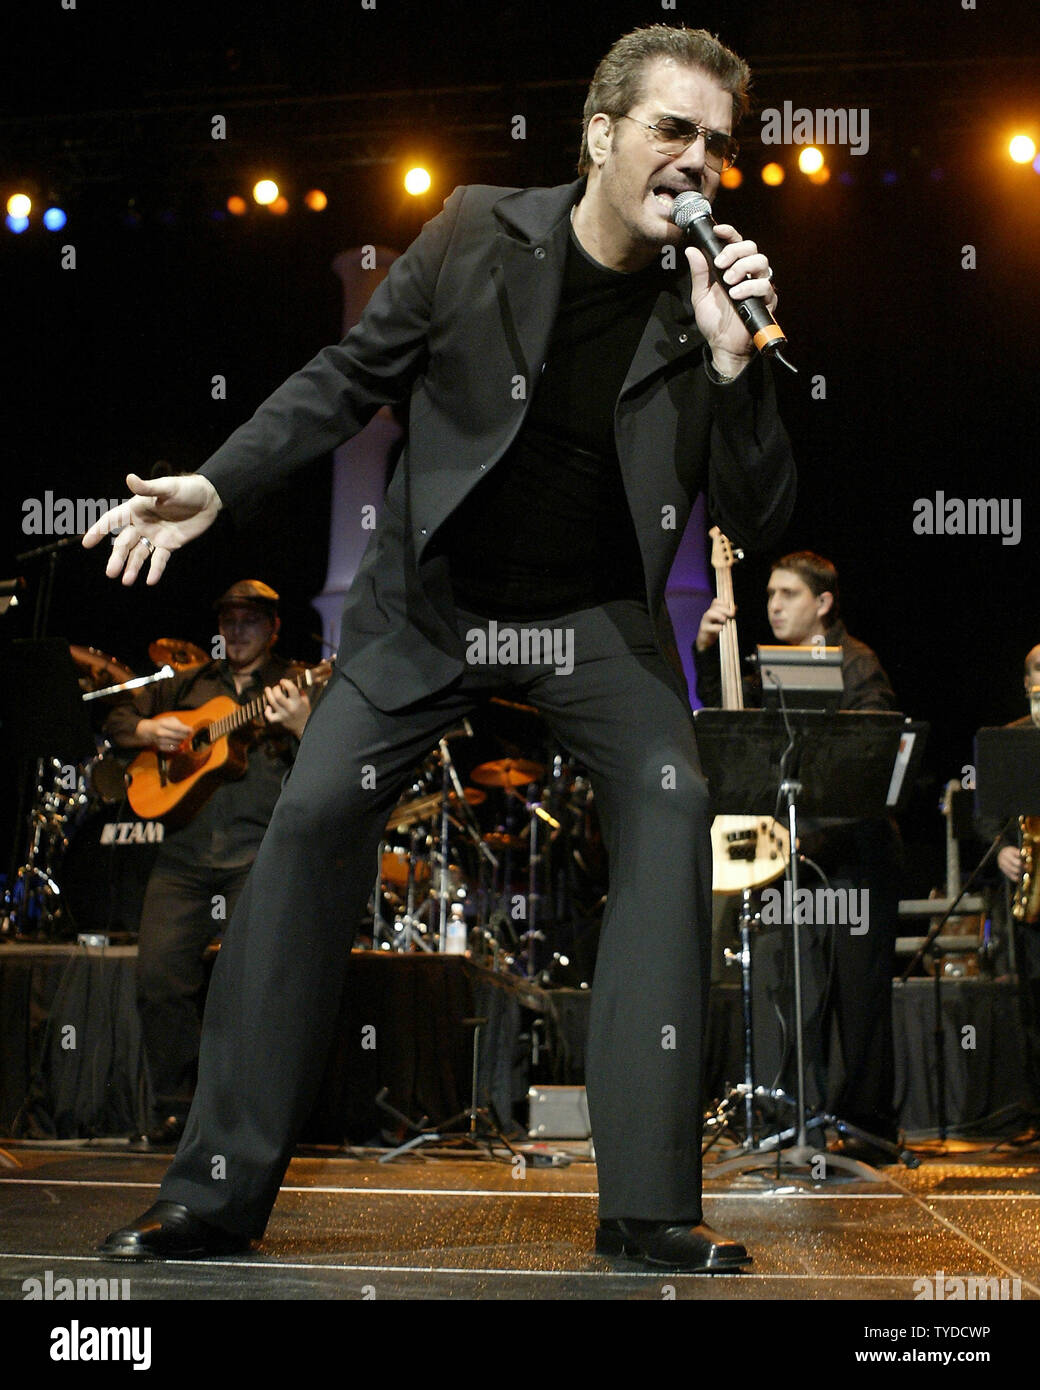 Willy Chirino performs in concert at the American Airlines Arena in Miami,  Florida, on October 17, 2004.  (UPI Photo/Michael Bush) Stock Photo